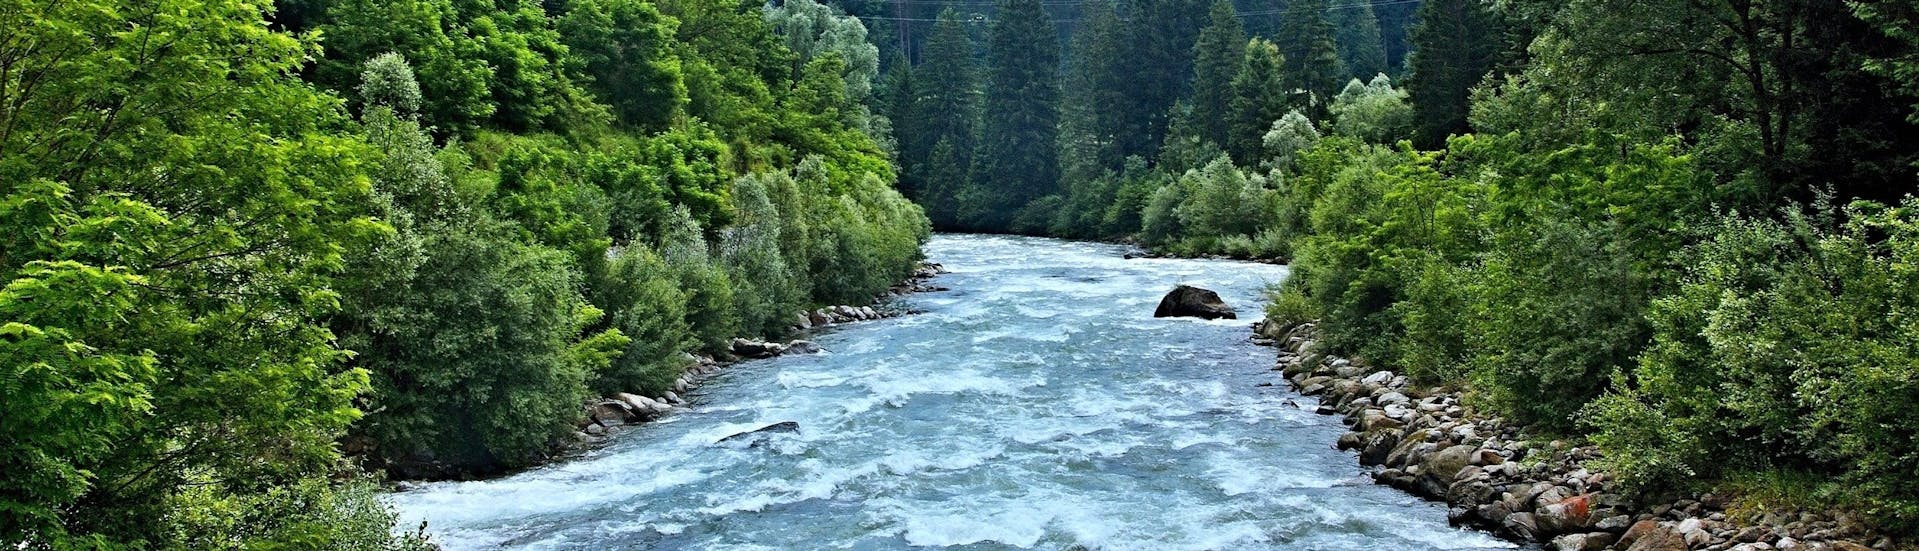 An image of the Noce River, a popular place to go rafting in Val di Sole.